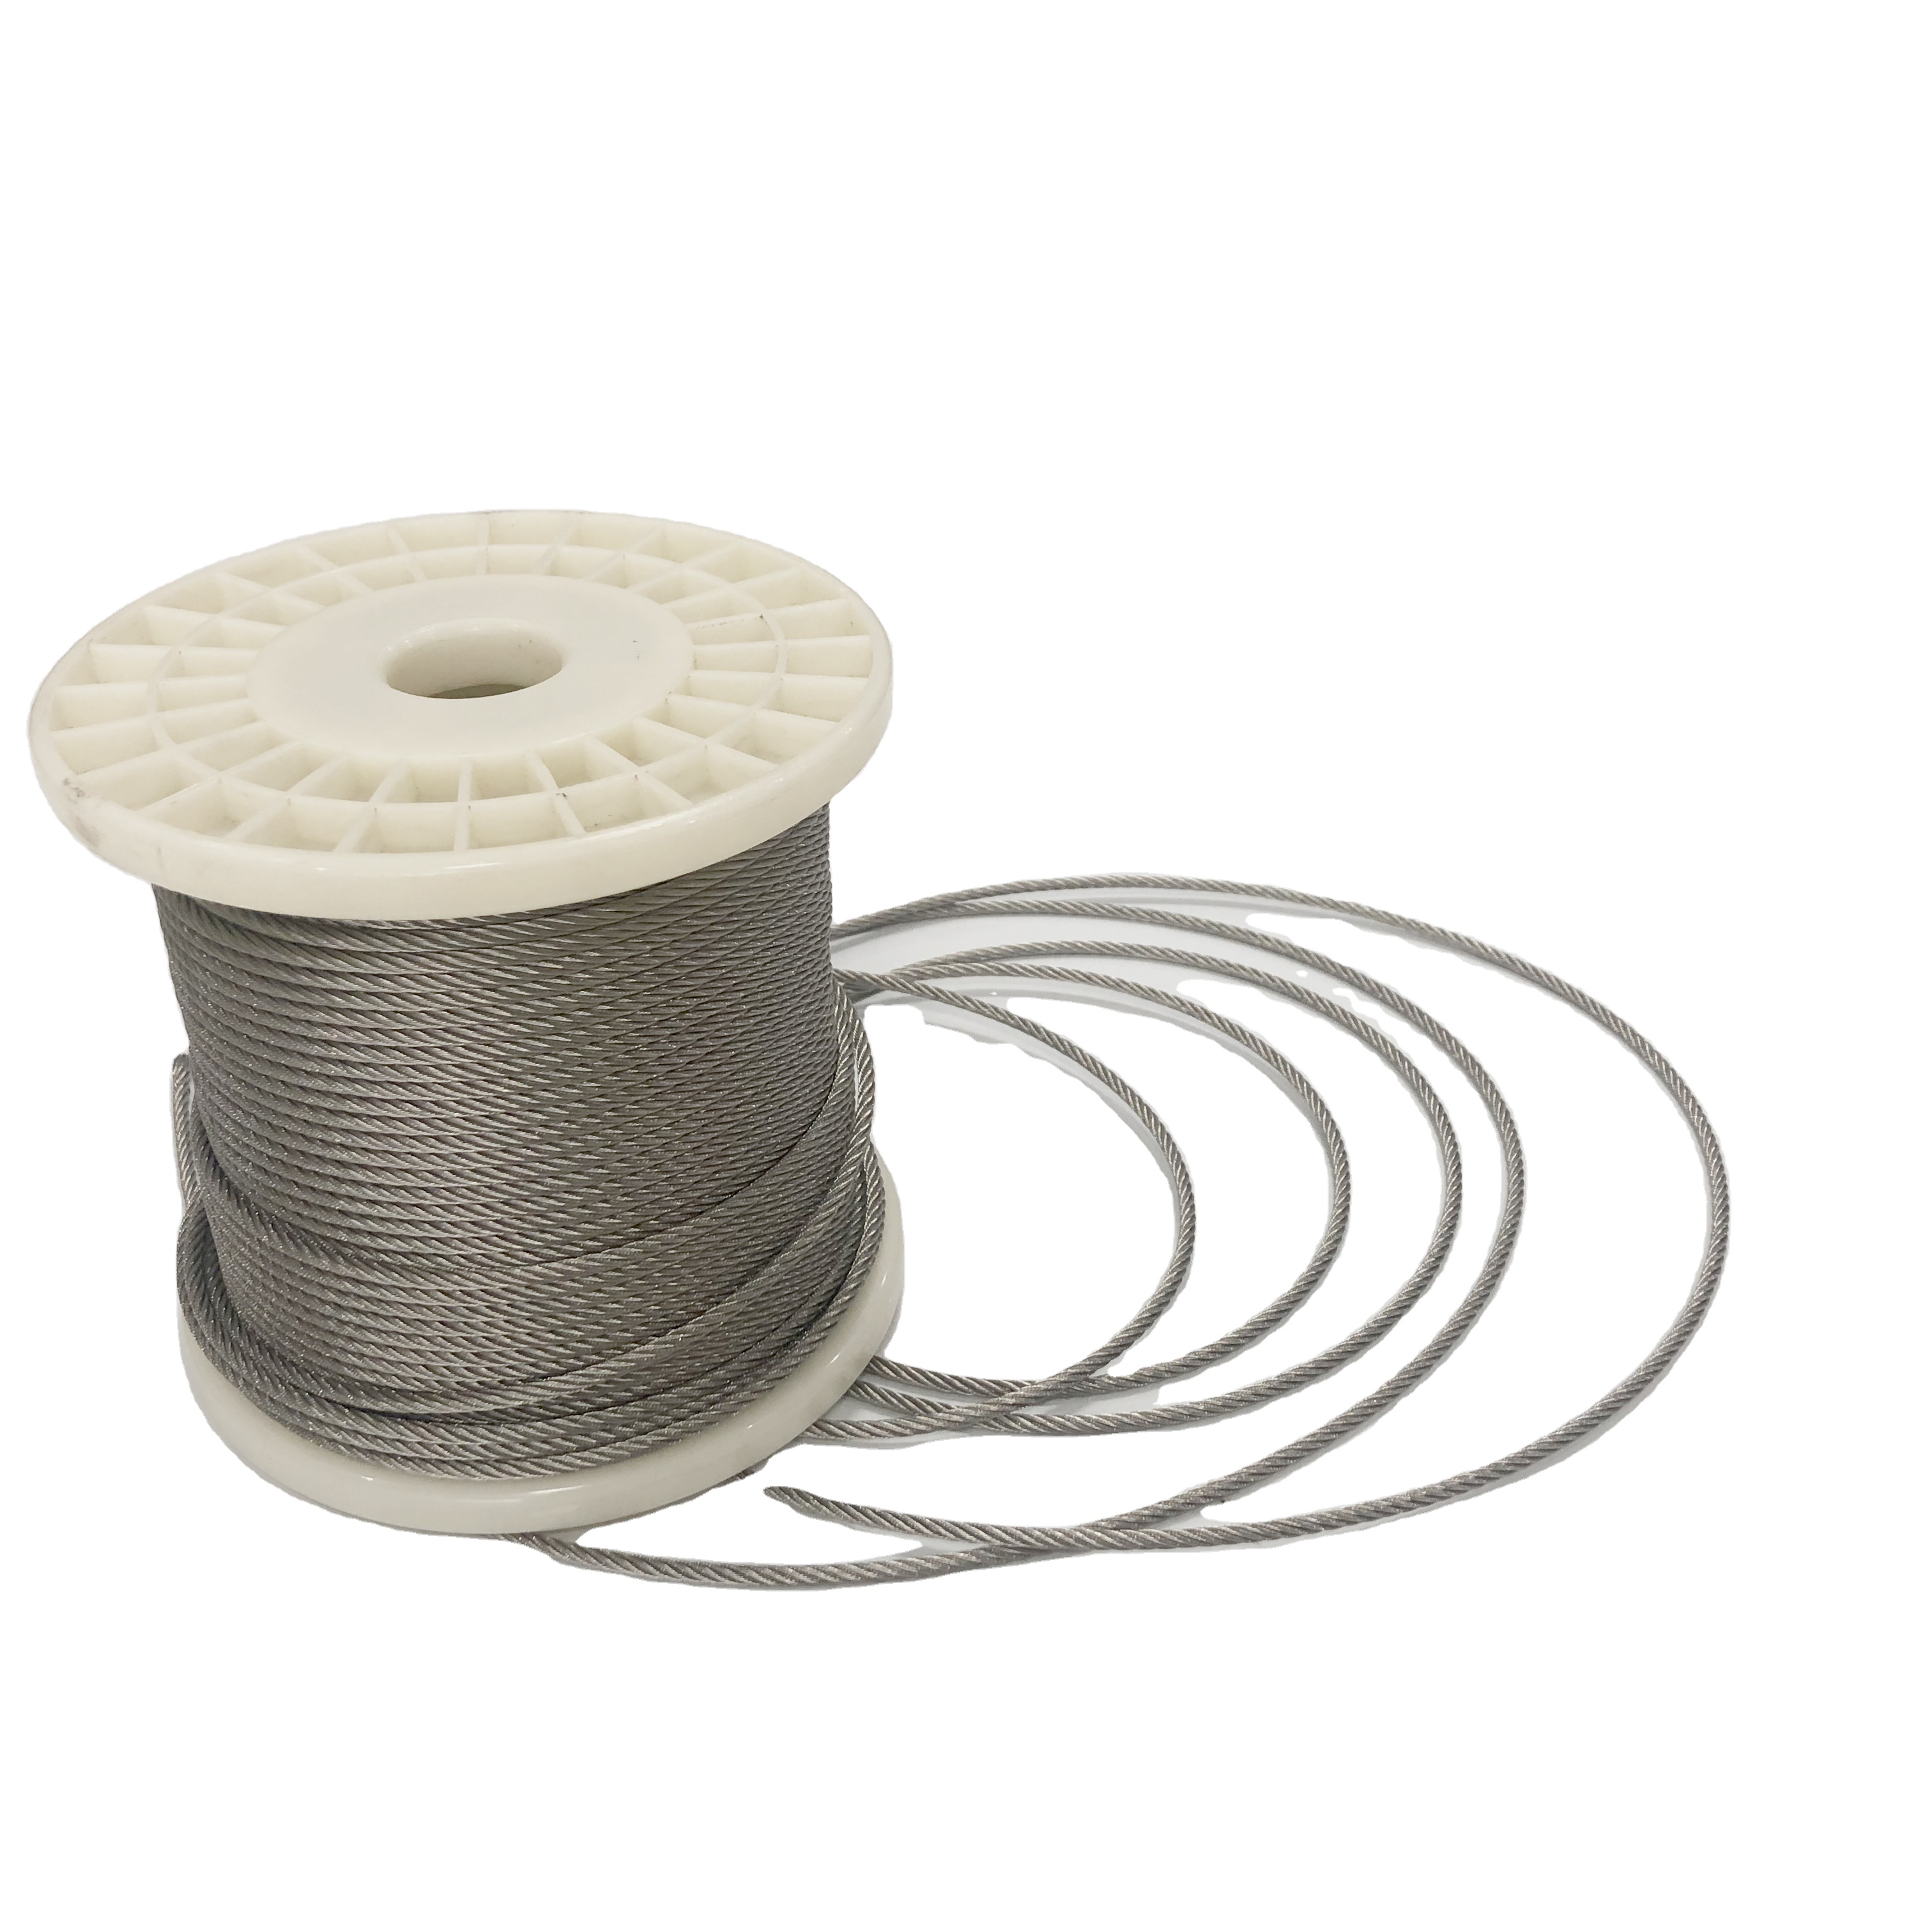 304 7x7 4mm Pvc-coated Elevator Galvanized Steel Wire Rope